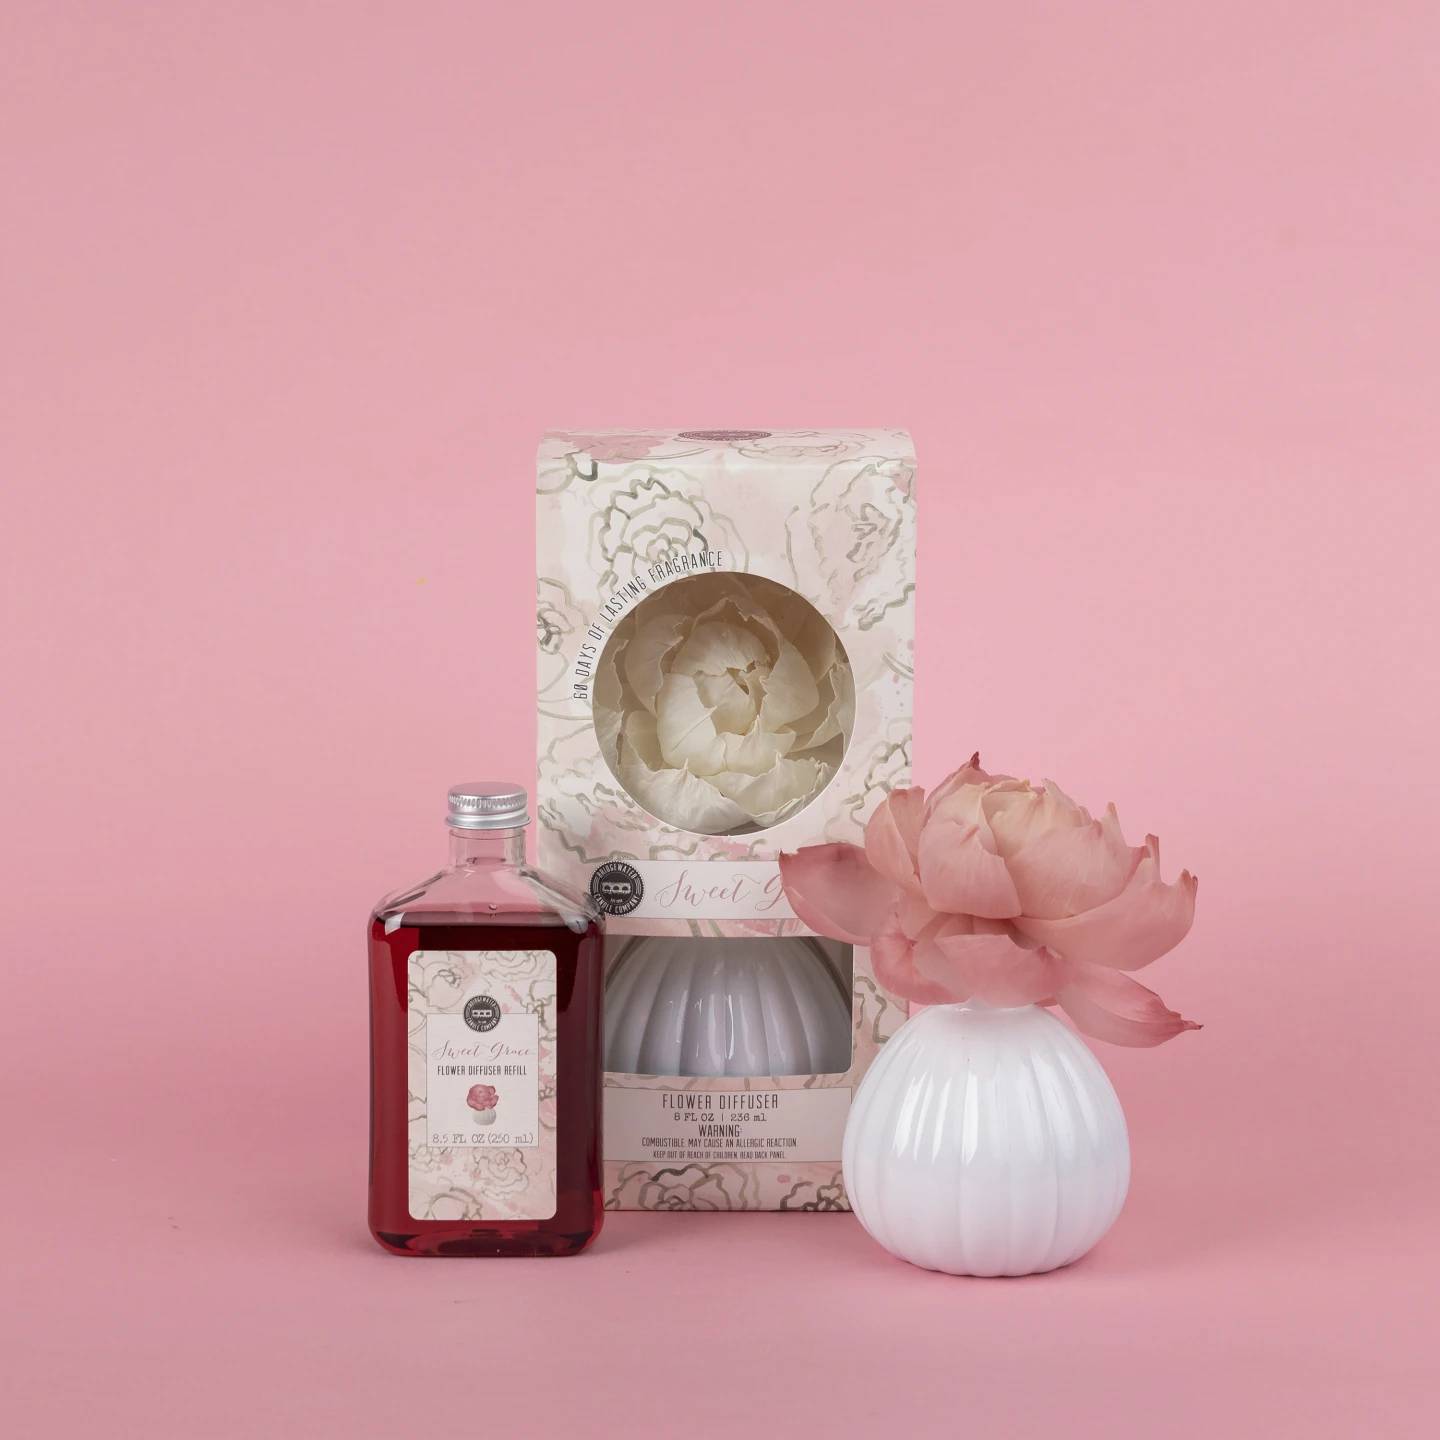 This image provided by Bridgewater Candles shows a Sweet Grace flower diffuser.